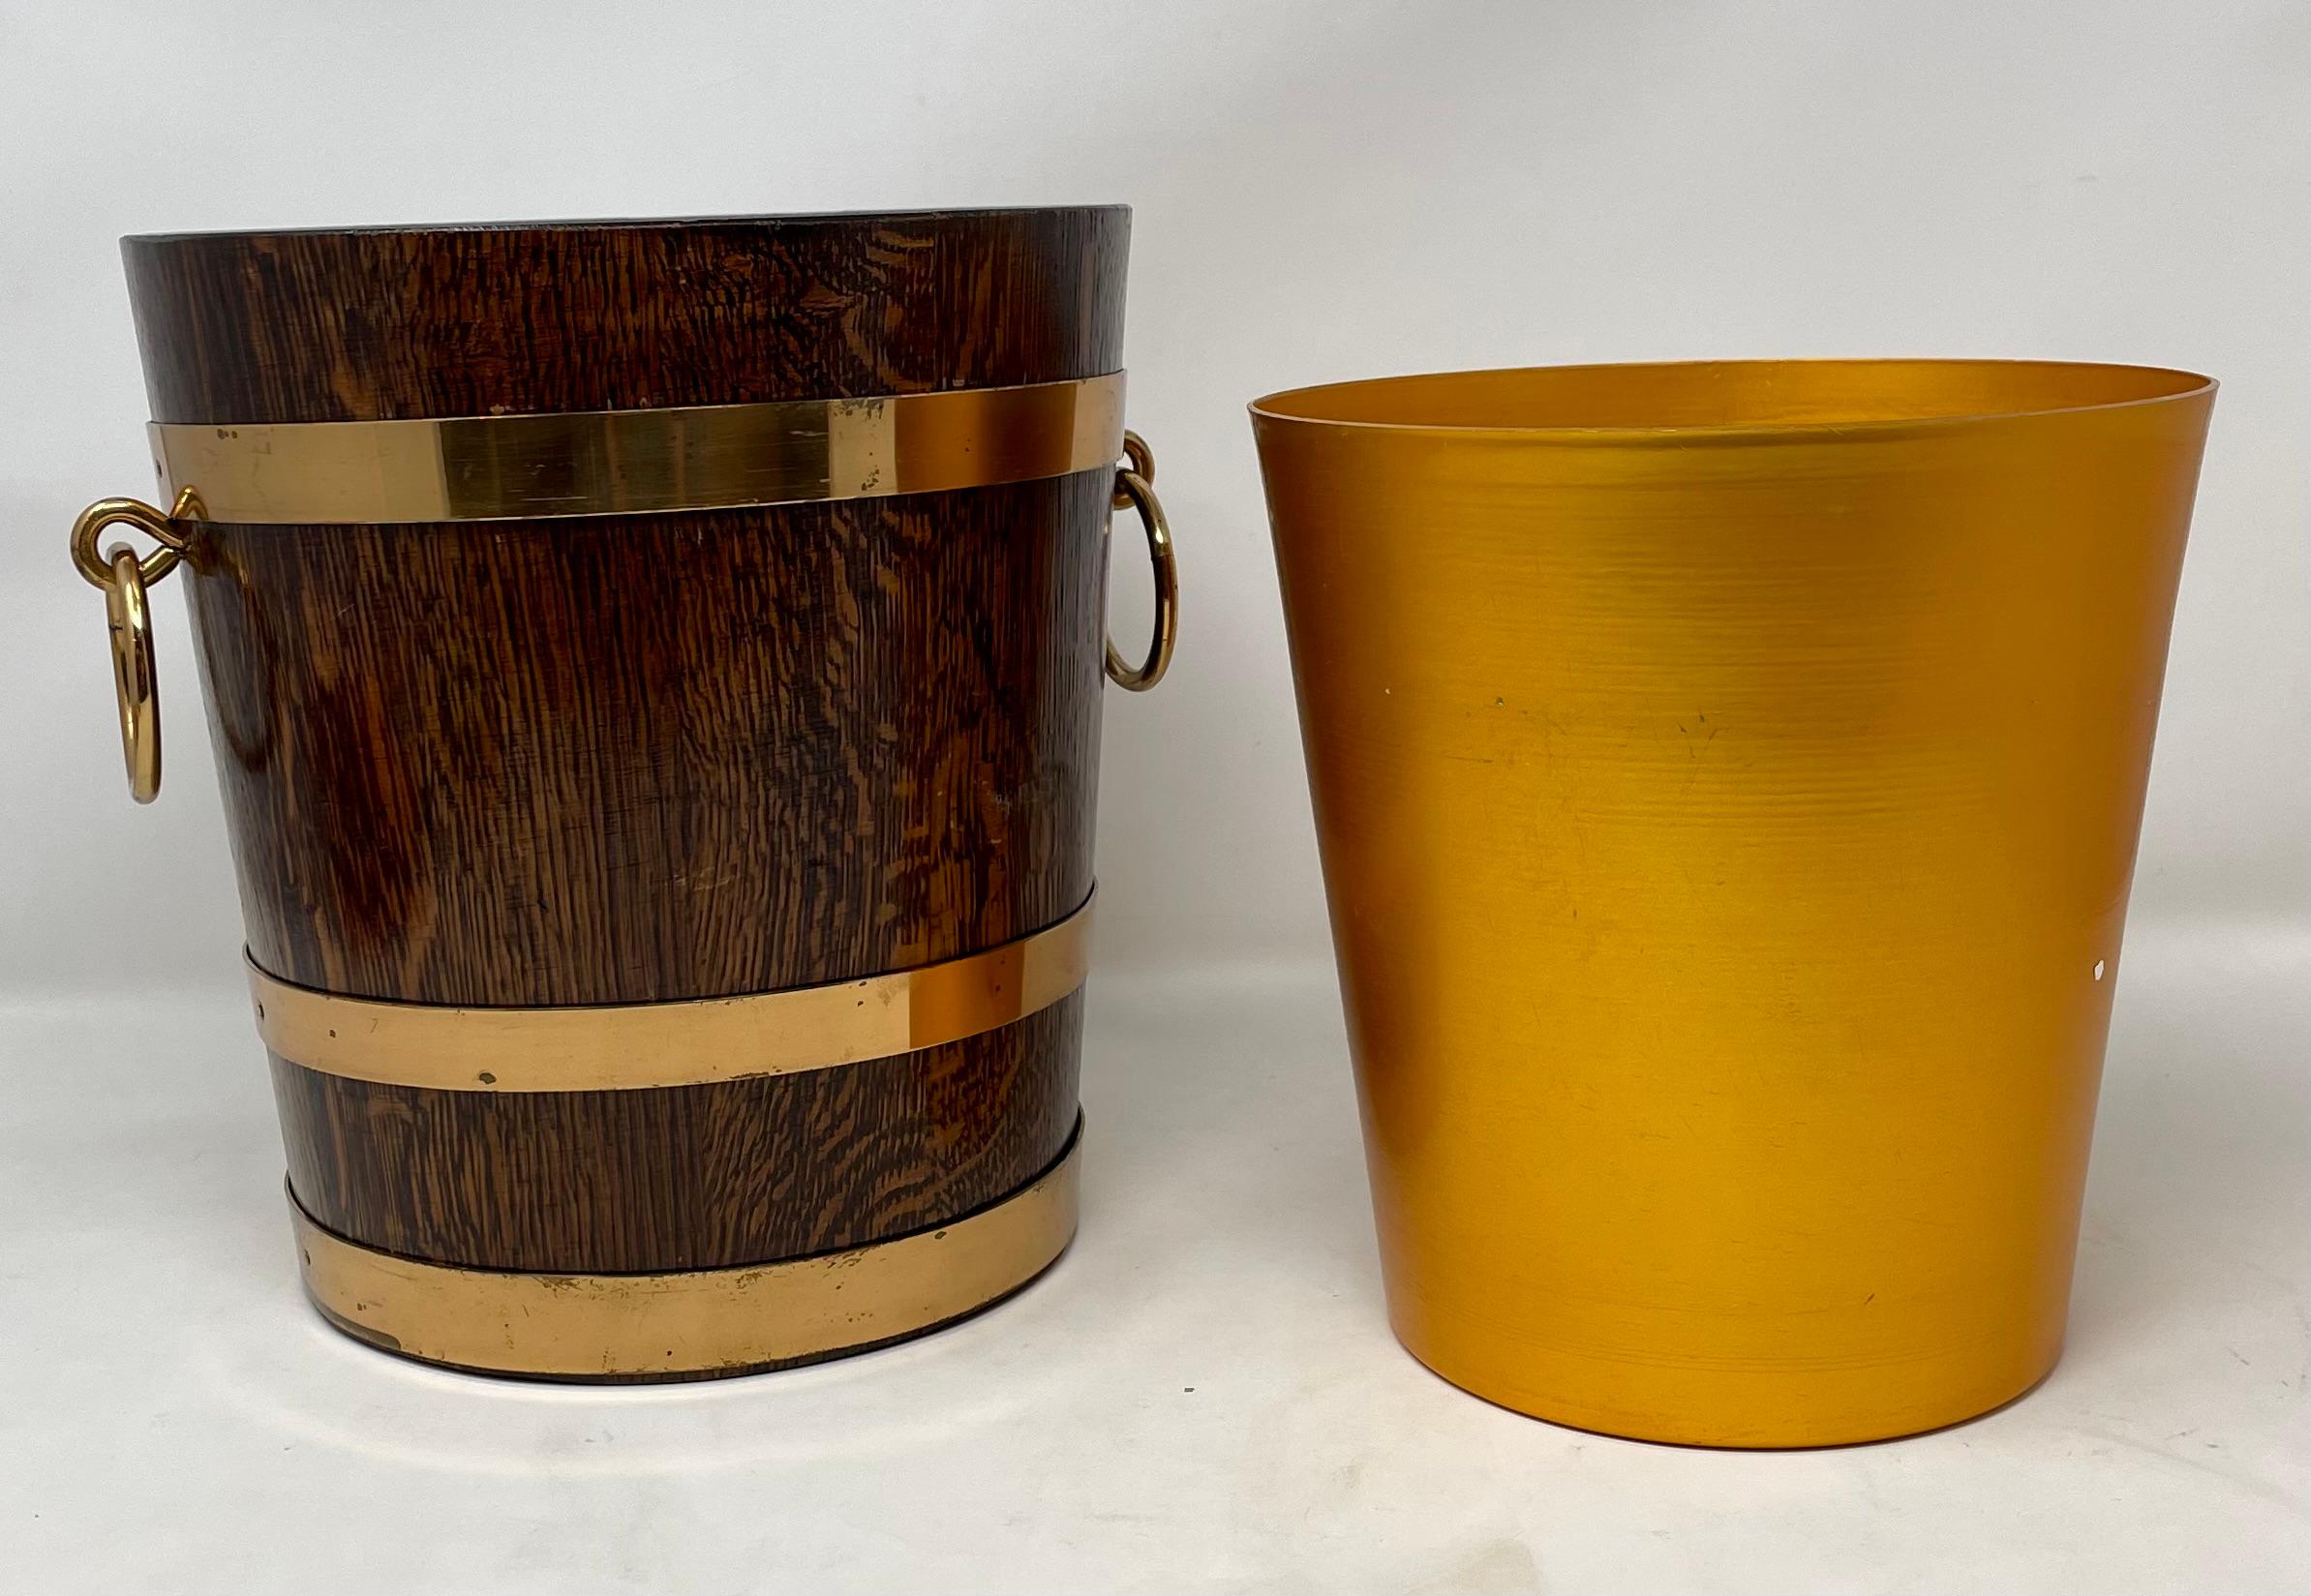 Antique French oak & brass champagne bucket with original liner, signed by maker, circa 1930's.
Wonderful hand-made and hallmarked wine cooler with bronze fittings.